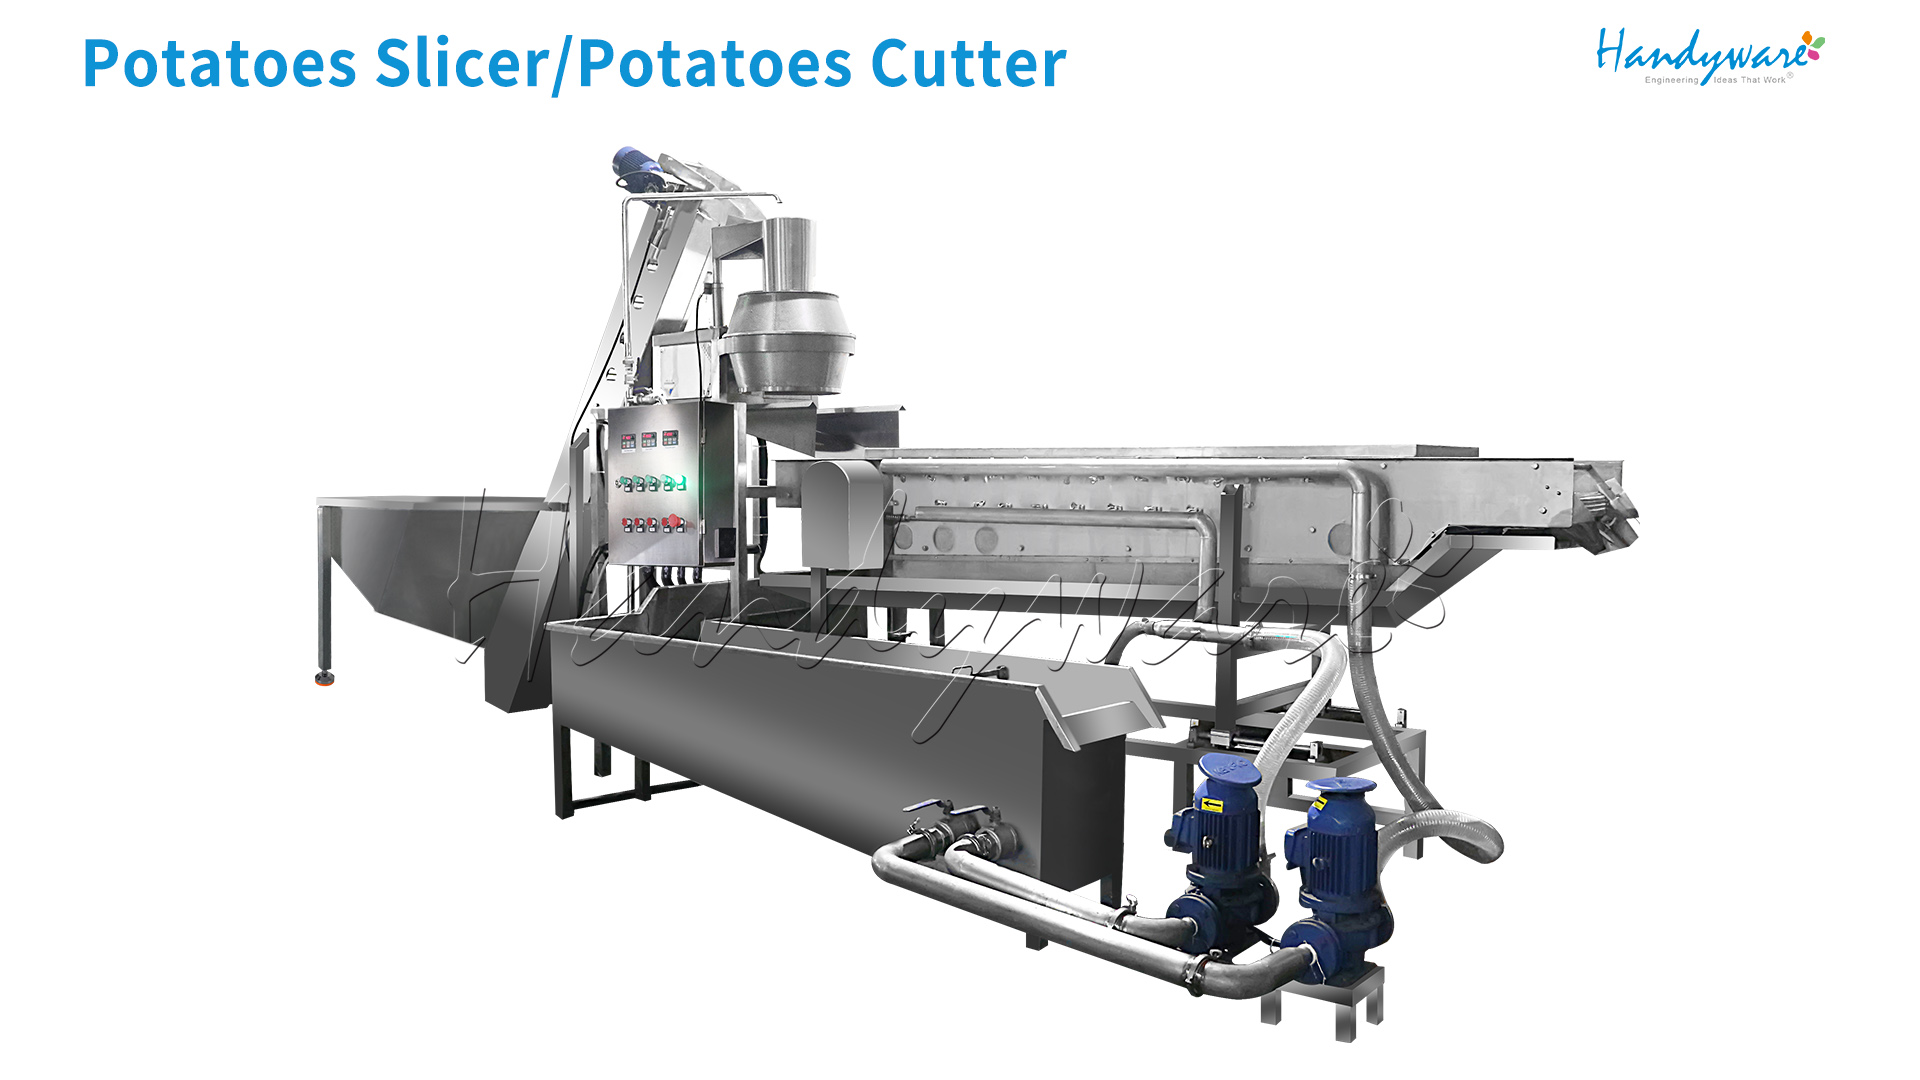 Potatoes Slicer or Potatoes Cutter